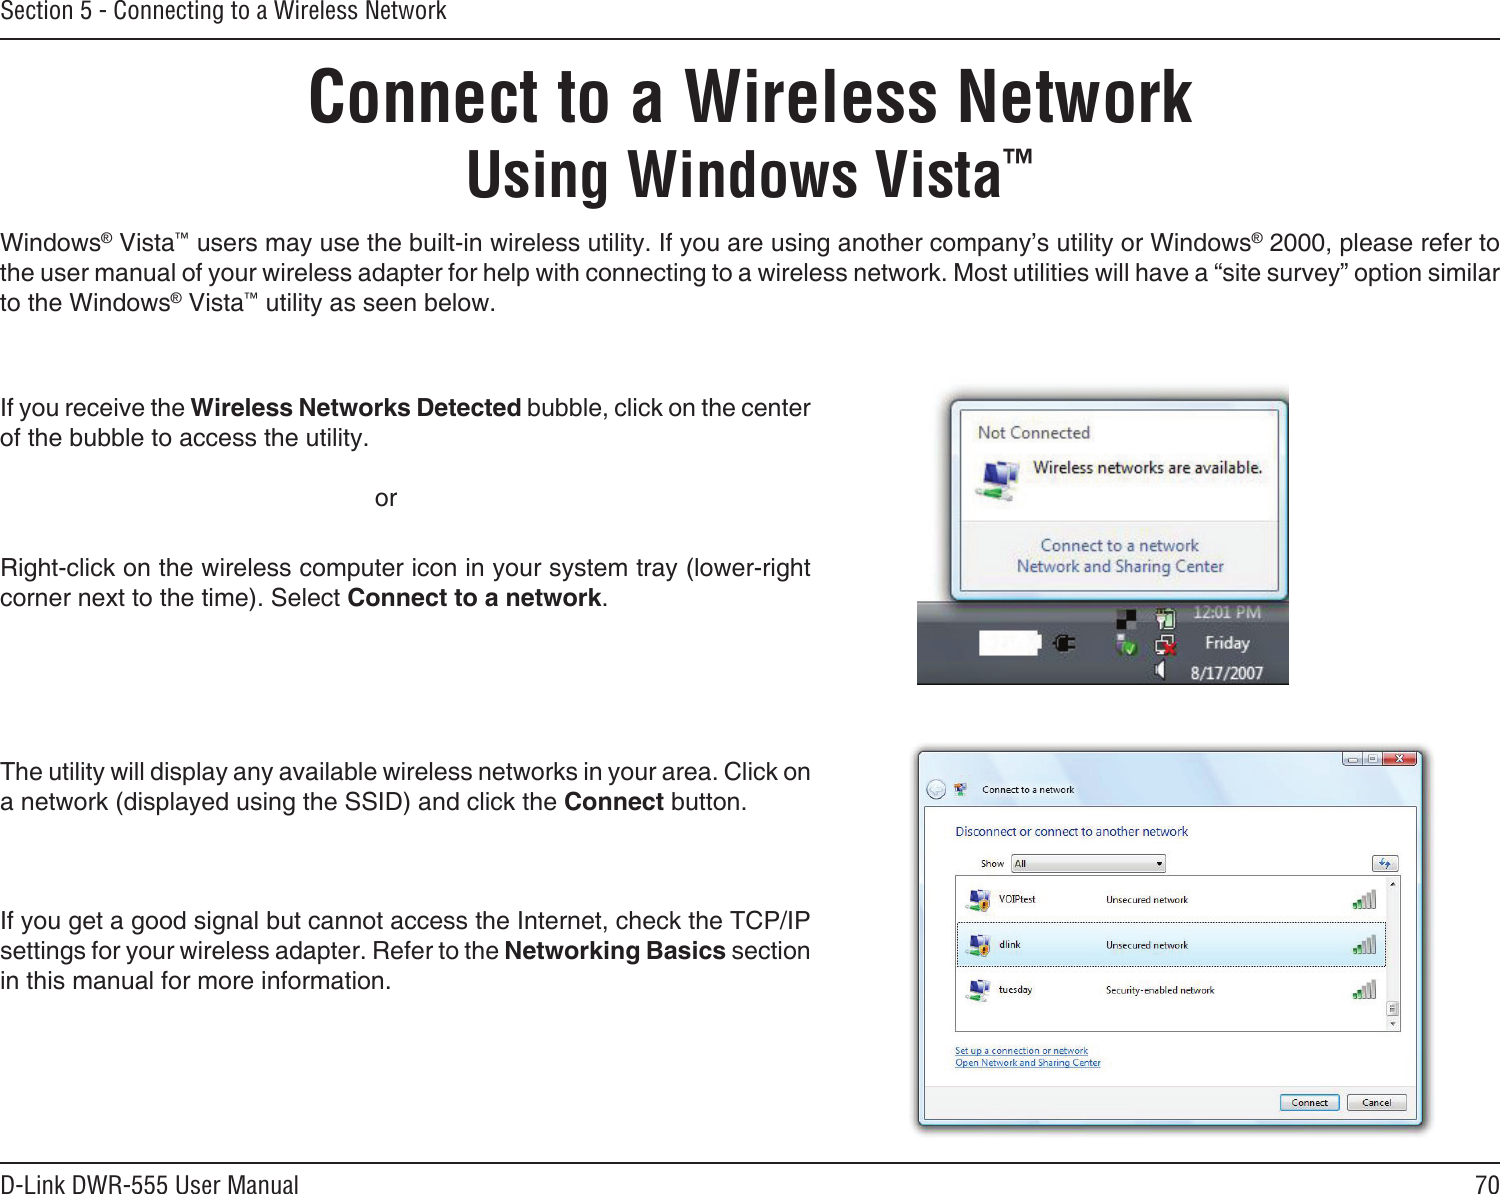 70D-Link DWR-555 User ManualSection 5 - Connecting to a Wireless NetworkConnect to a Wireless NetworkUsing Windows Vista™Windows® Vista™ users may use the built-in wireless utility. If you are using another company’s utility or Windows® 2000, please refer to the user manual of your wireless adapter for help with connecting to a wireless network. Most utilities will have a “site survey” option similar to the Windows® Vista™ utility as seen below.Right-click on the wireless computer icon in your system tray (lower-right corner next to the time). Select Connect to a network.If you receive the Wireless Networks Detected bubble, click on the center of the bubble to access the utility.     orThe utility will display any available wireless networks in your area. Click on a network (displayed using the SSID) and click the Connect button.If you get a good signal but cannot access the Internet, check the TCP/IP settings for your wireless adapter. Refer to the Networking Basics section in this manual for more information.